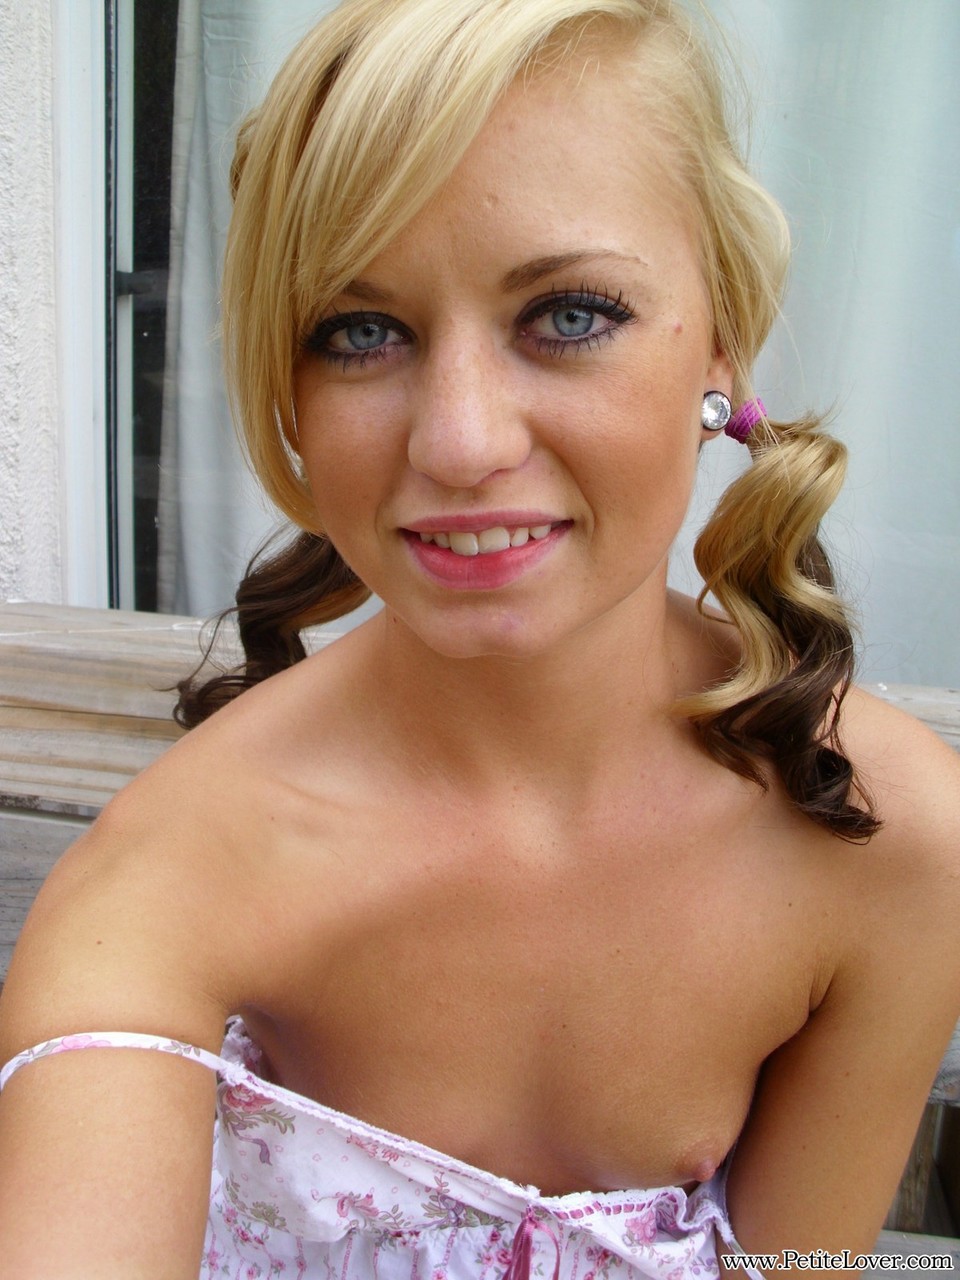 Cute blonde Tiff in pigtails showing off her wee small tits & tiny bald pussy photo porno #428478640 | Petite Lover Pics, Tiff, Amateur, porno mobile